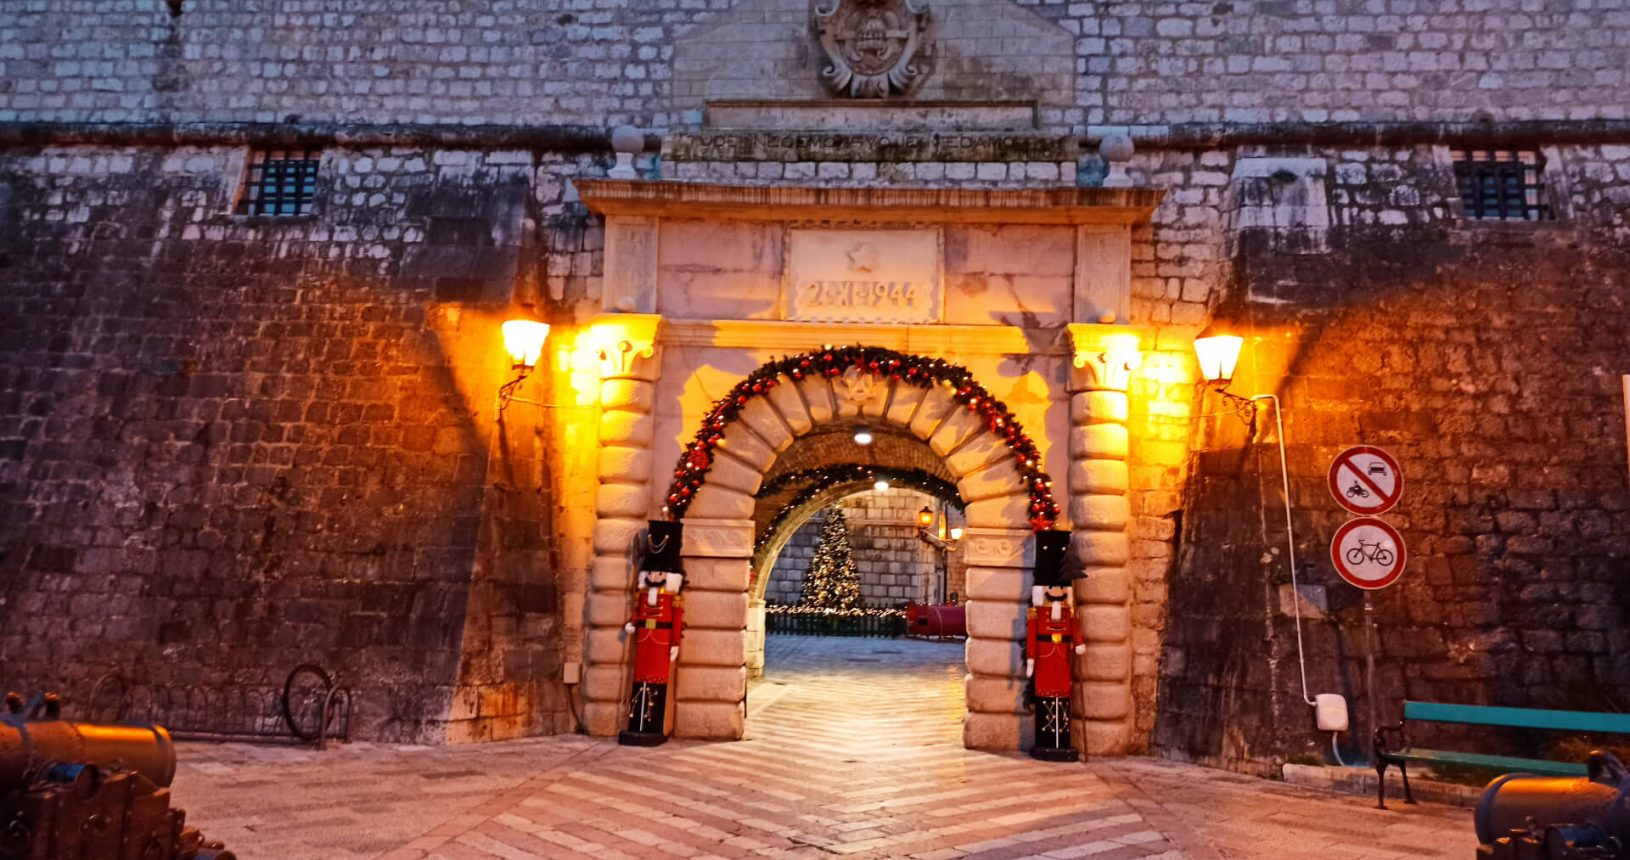 The main entrance to Kotor Old Town